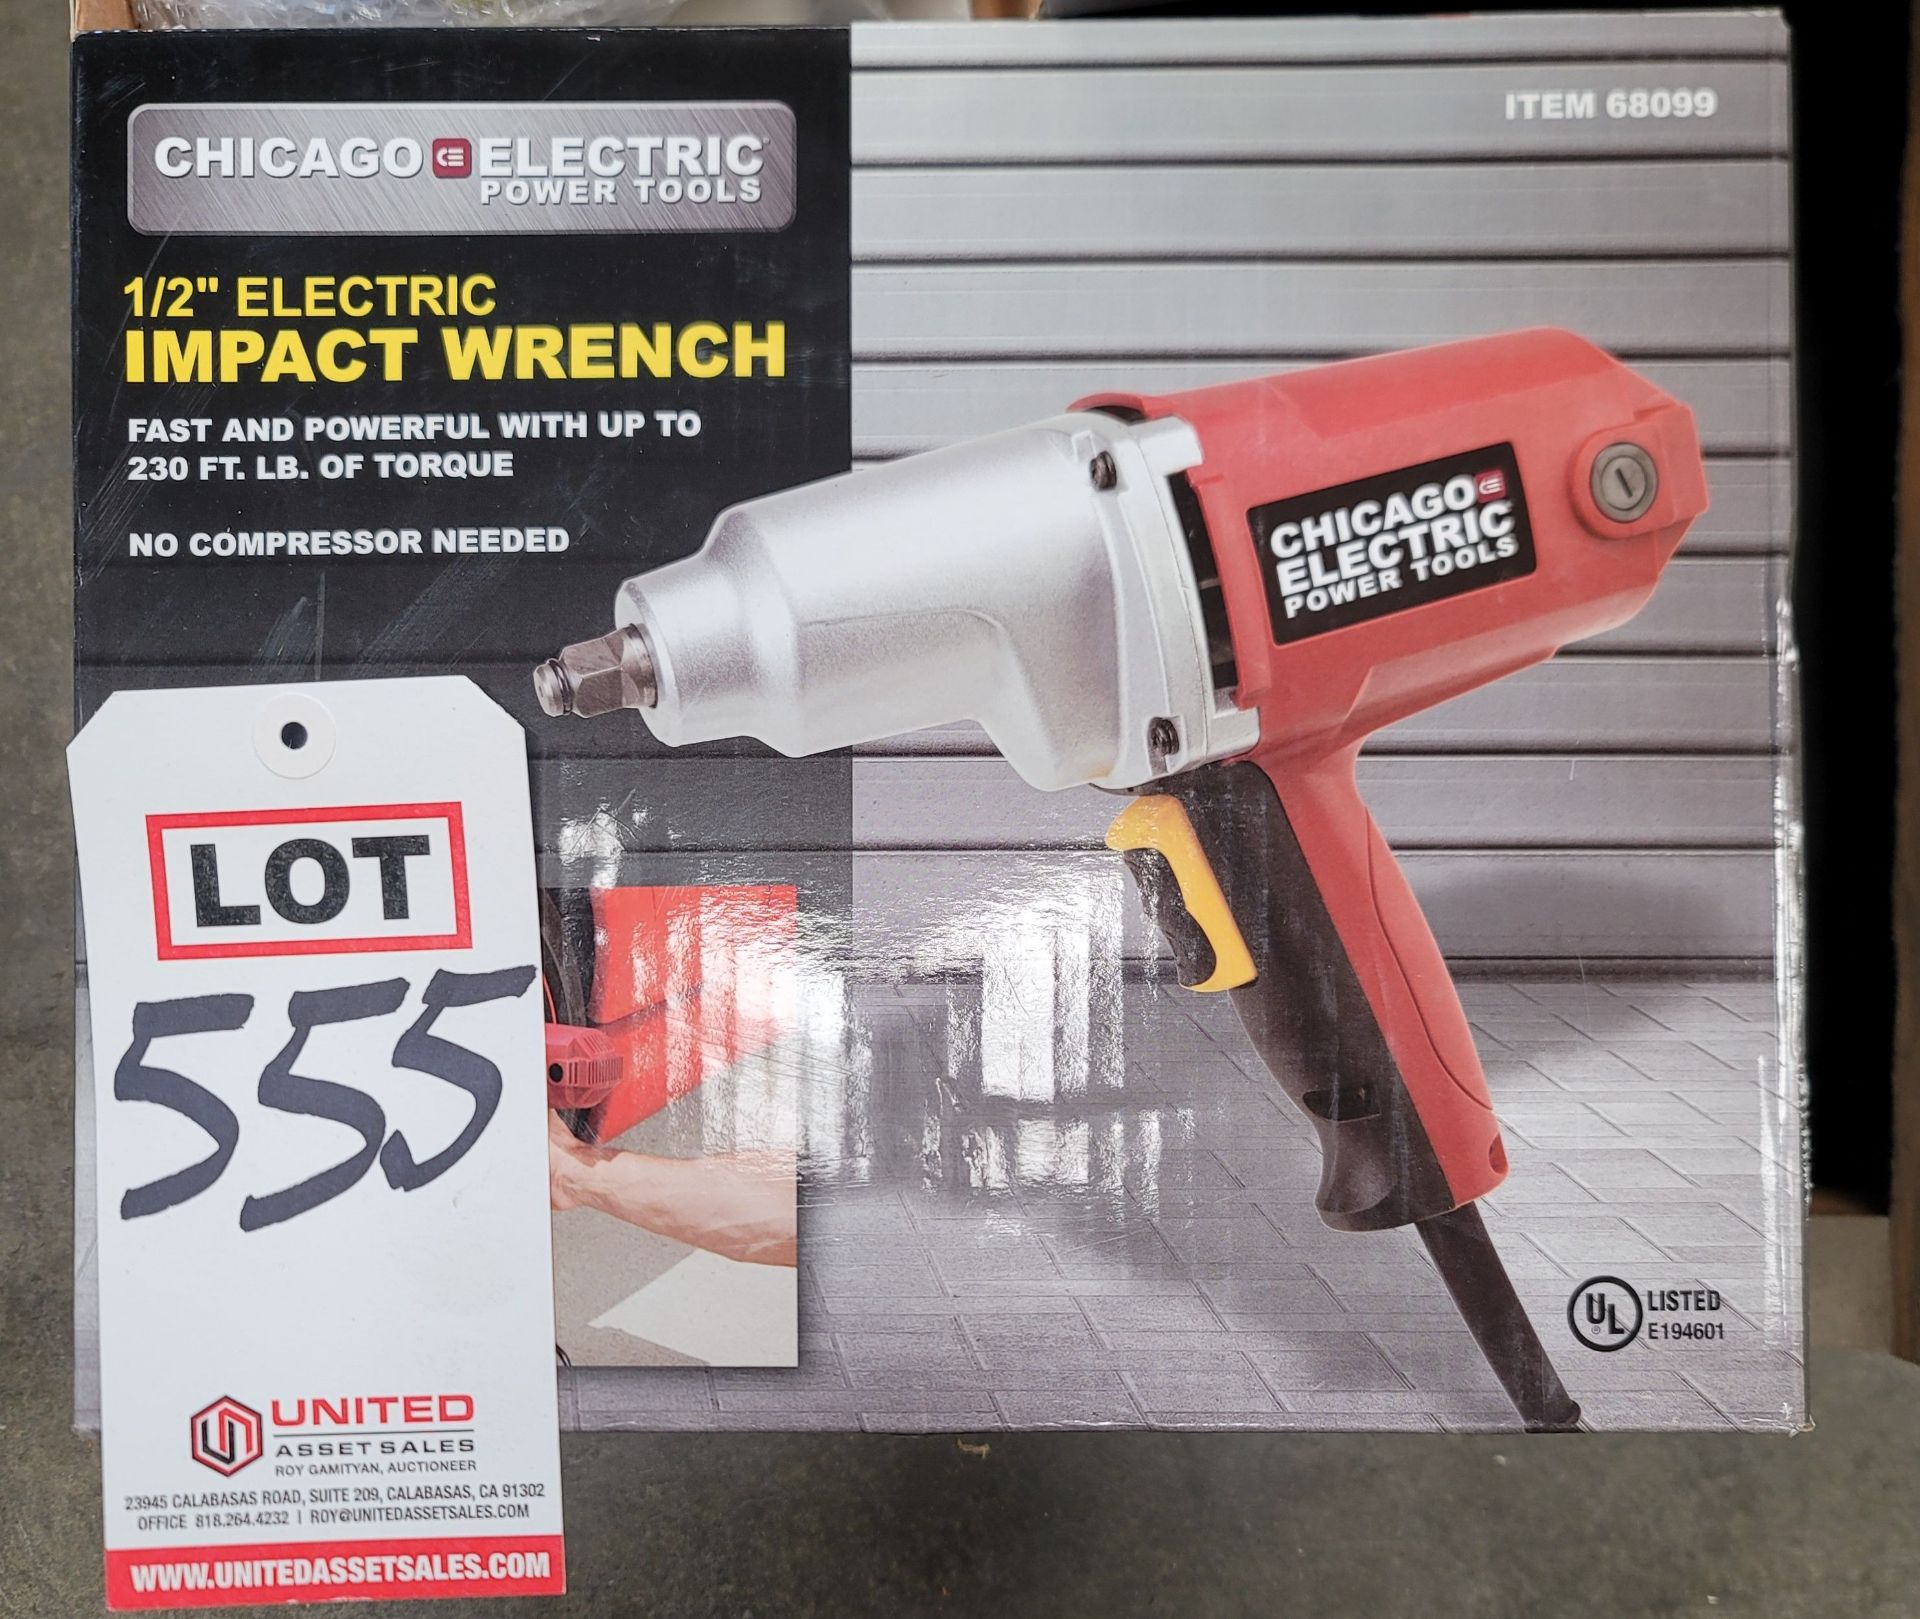 CHICAGO ELECTRIC 1/2" ELECTRIC IMPACT WRENCH, ITEM NO. 68099, UP TO 230 FT LB, NEW